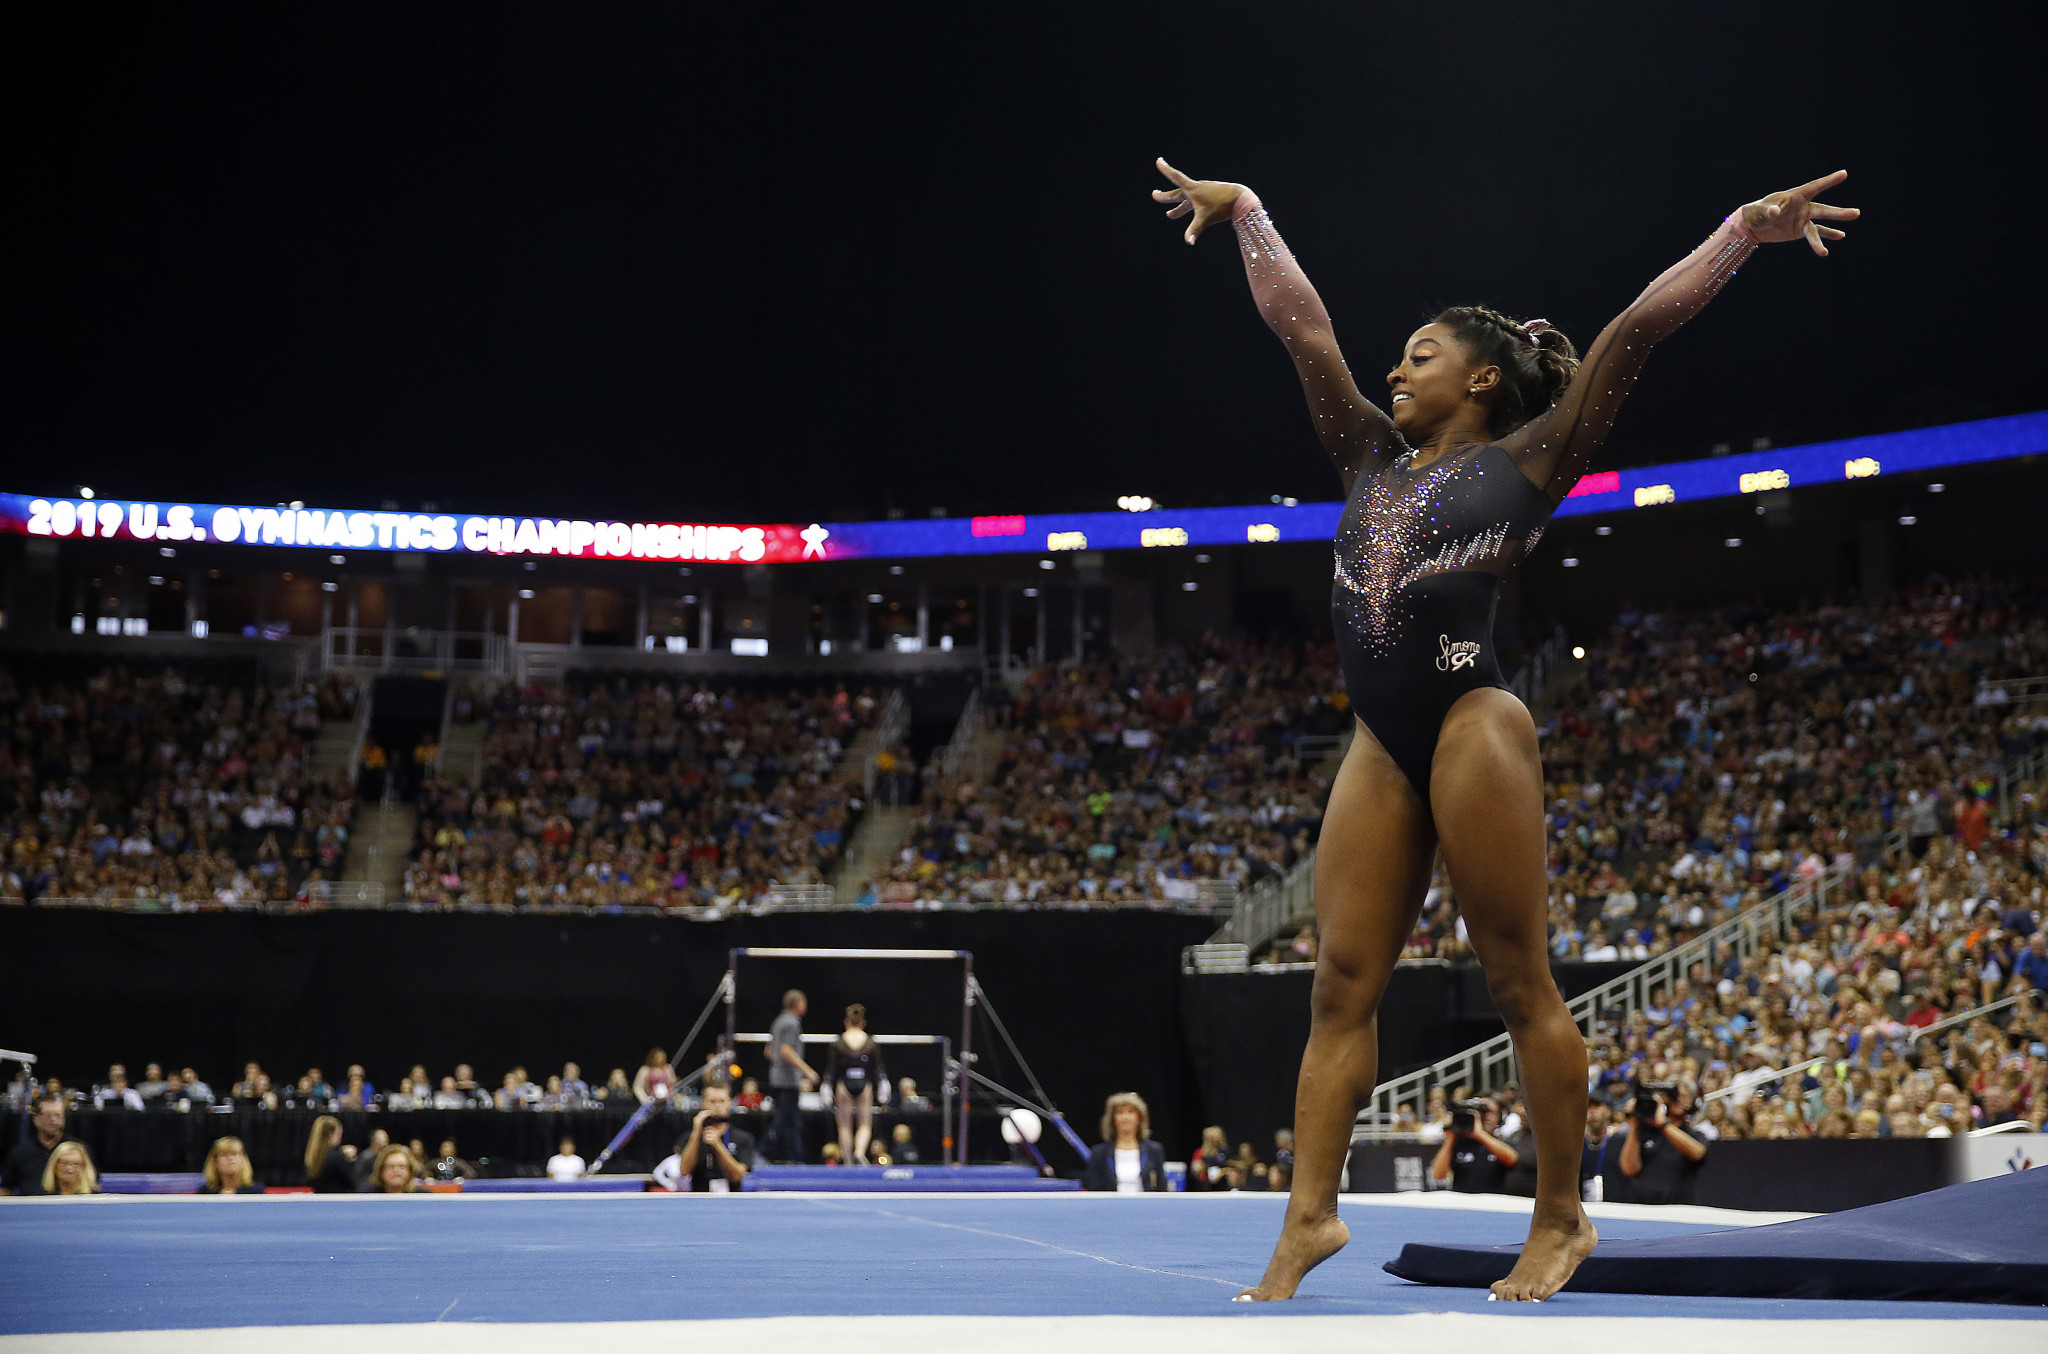 Simone Biles has been nominated for the women's award ©Getty Images